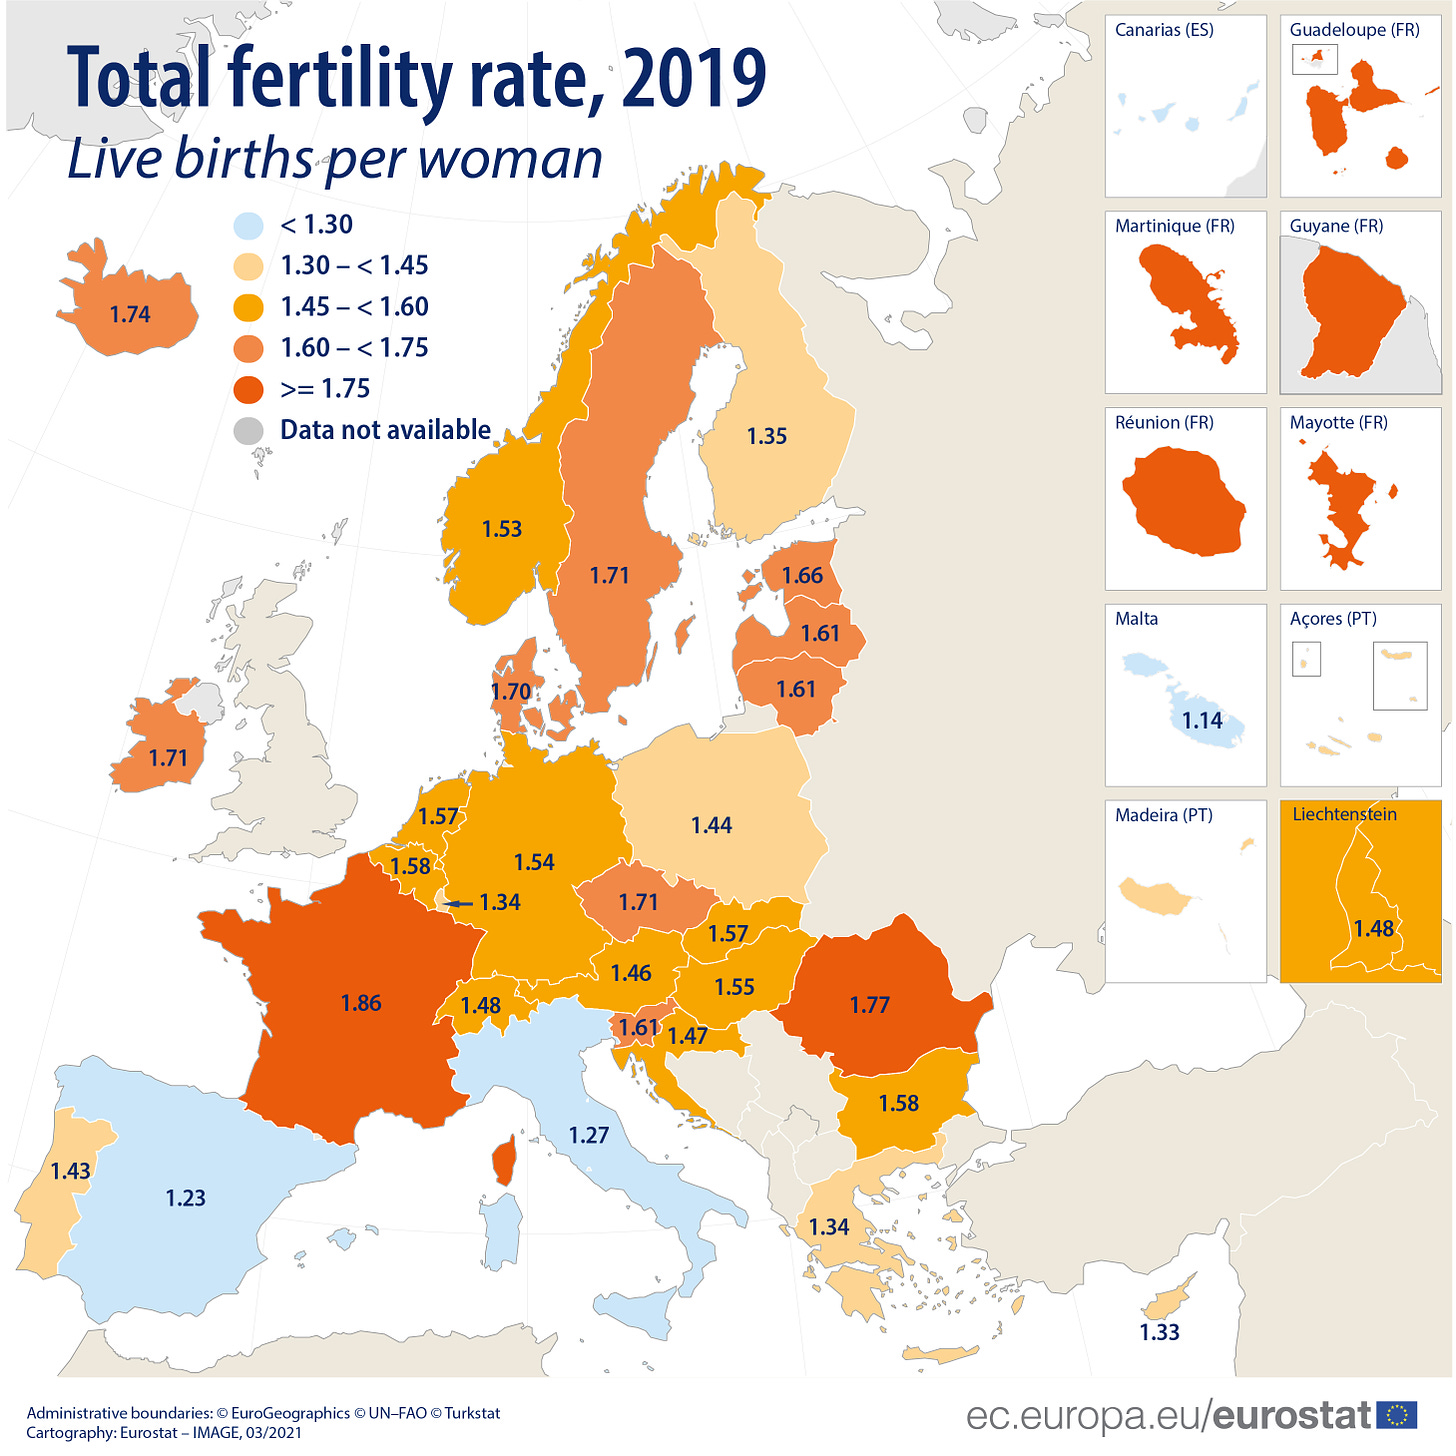 Total fertility rate per EU and EFTA country, 2019 data, map of Europe